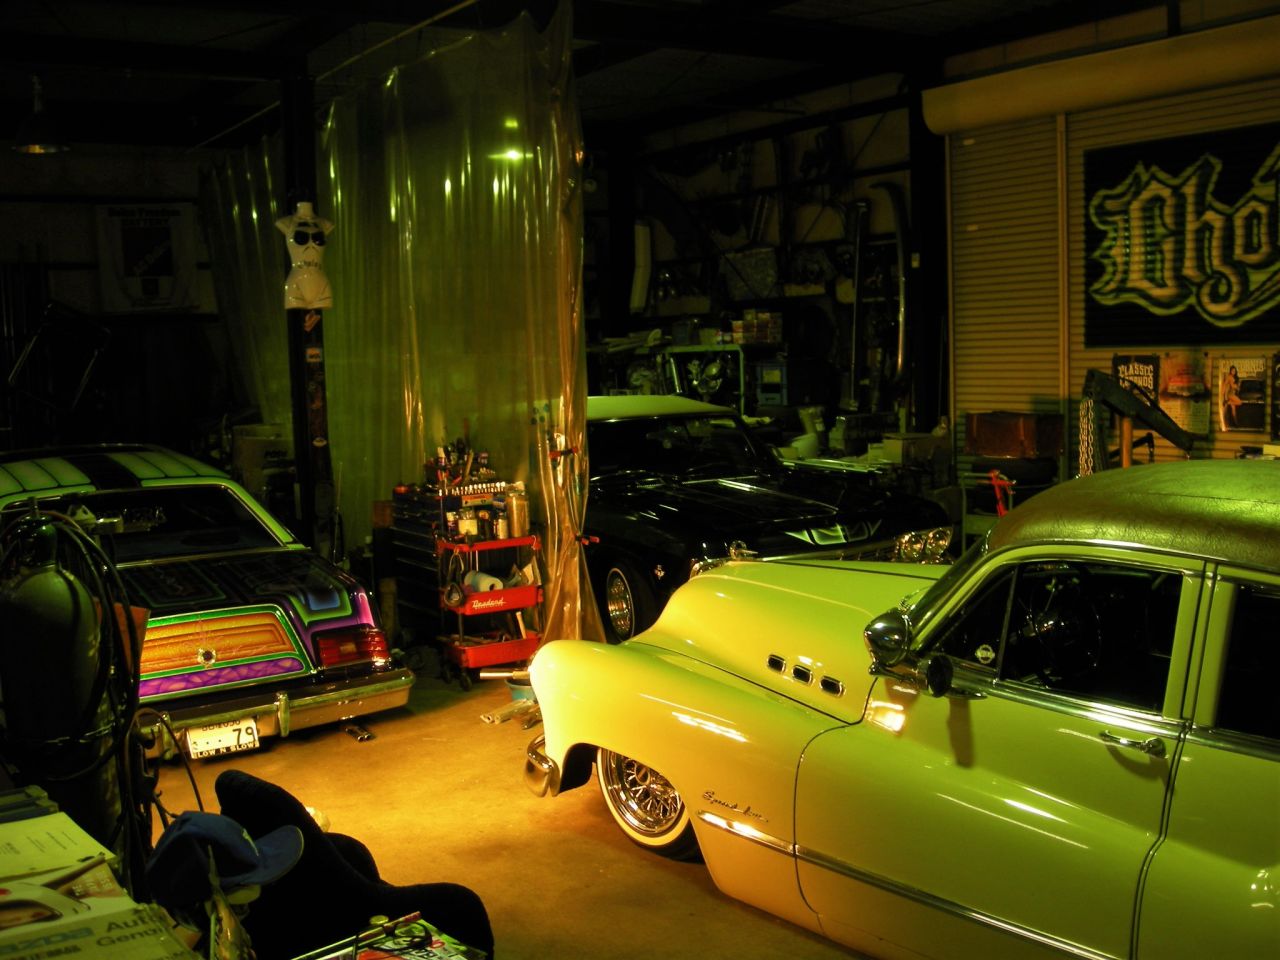 "When it first started in Japan, the cars would go over there and look exactly the same as in America. They wouldn't modify them or change them that much, so the artwork on the cars would look like they were Chicana," said photographer Luke Dorsett. 